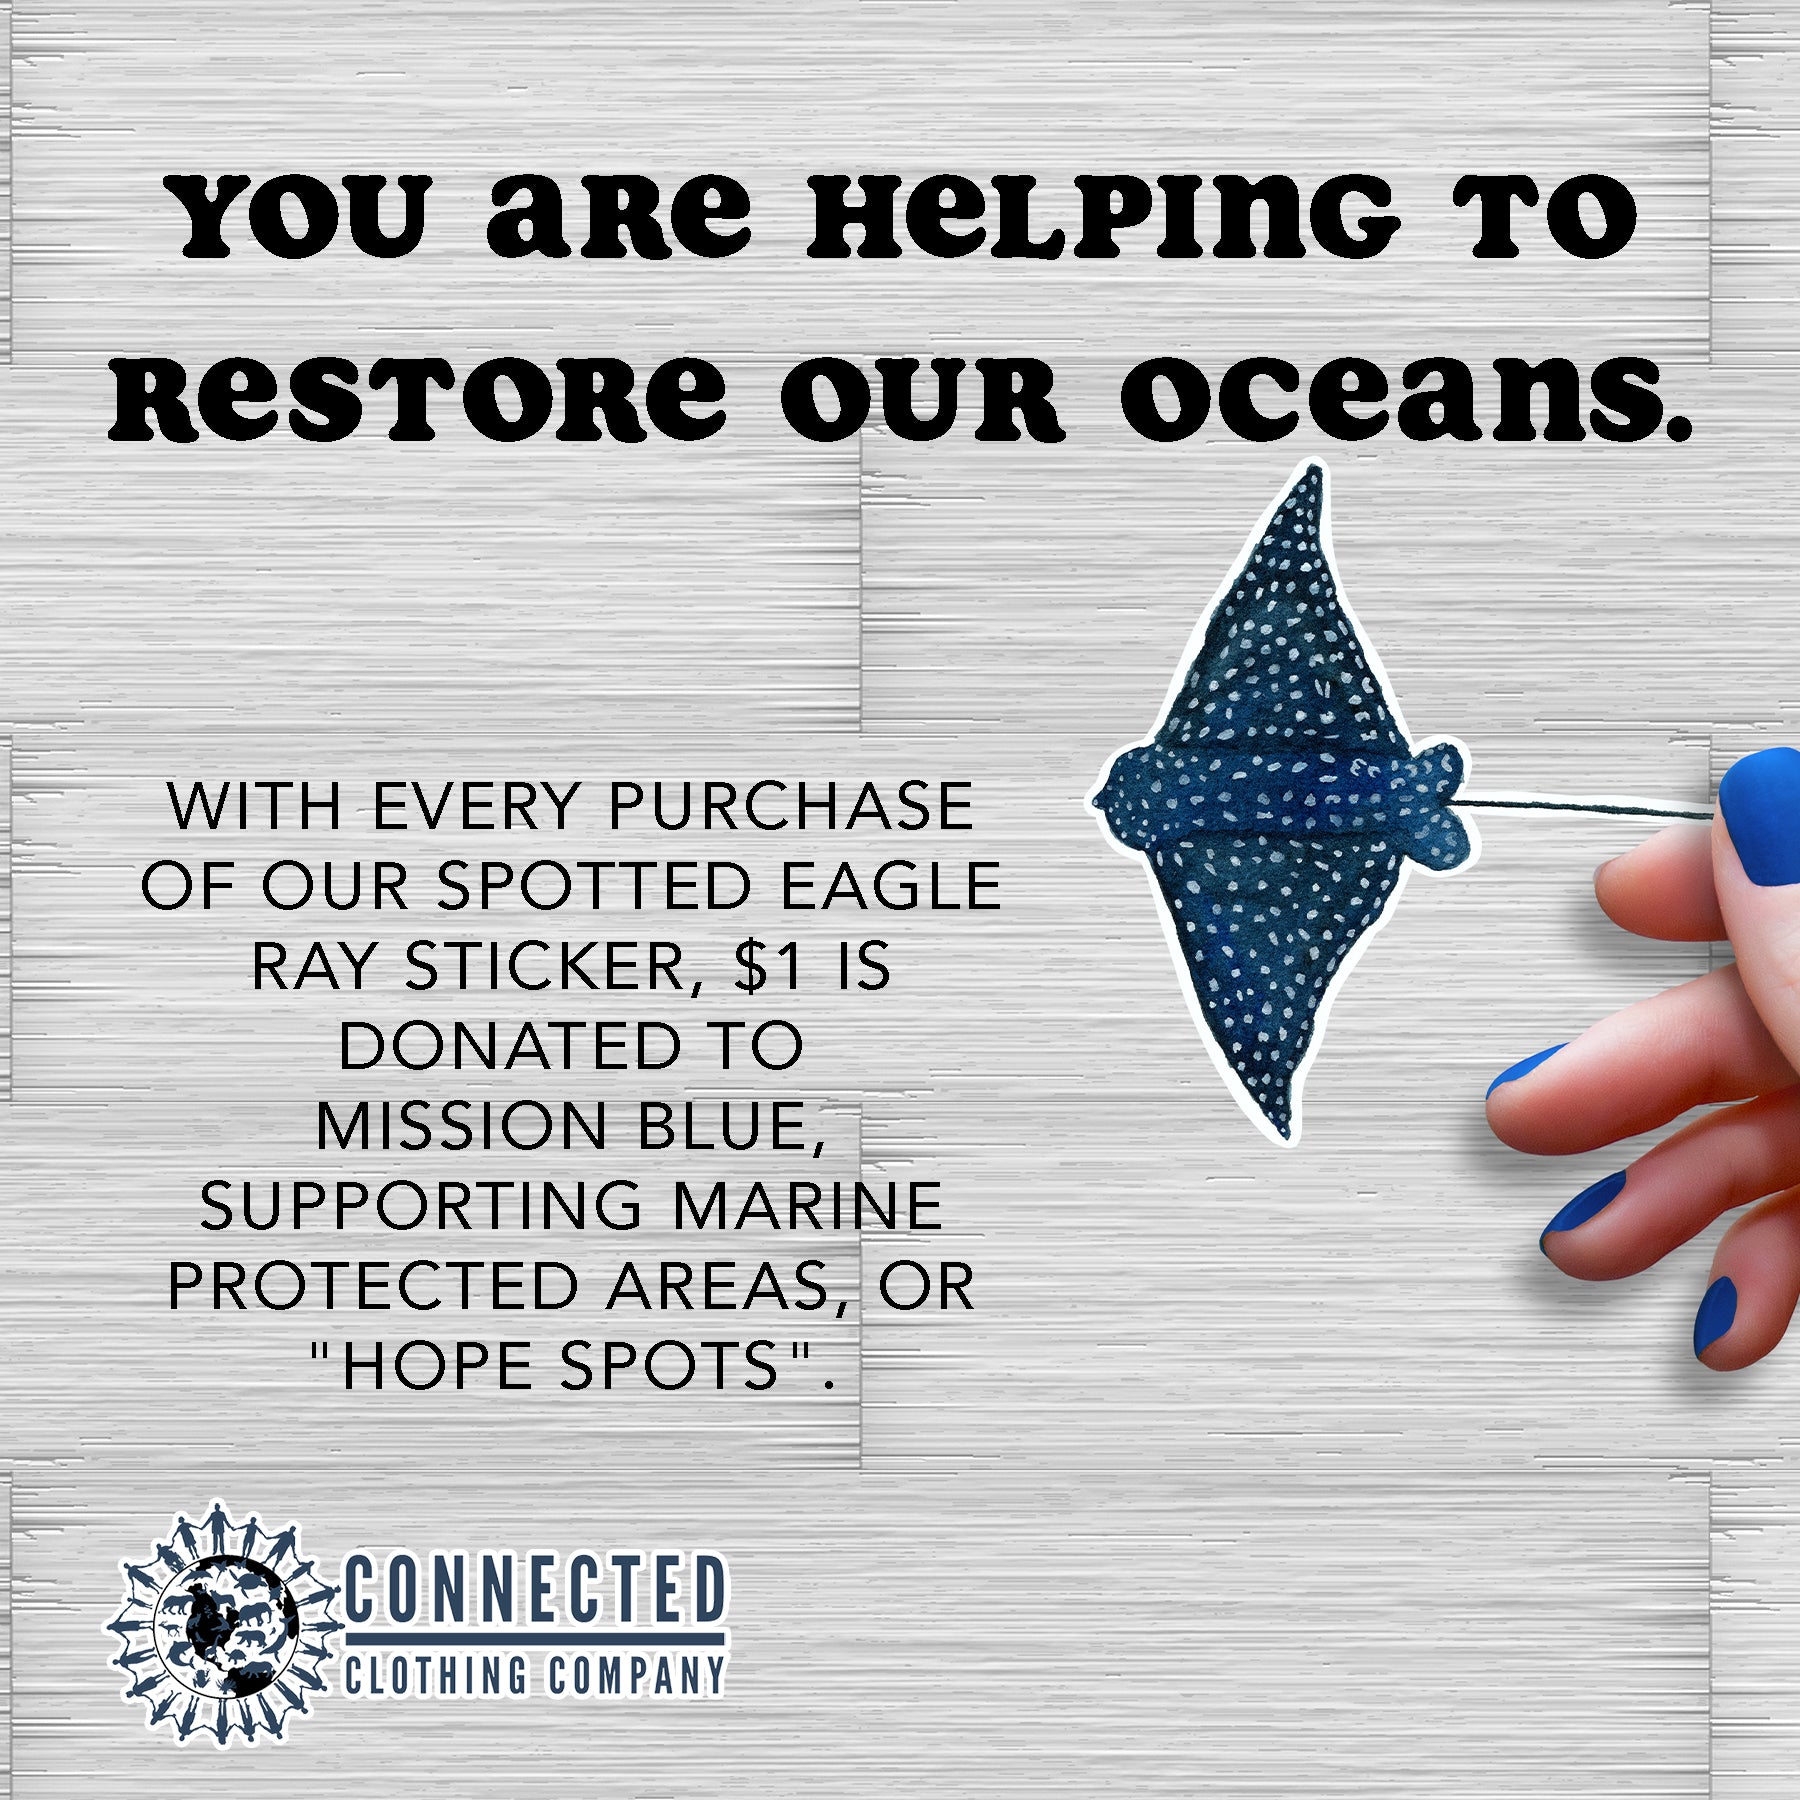 Spotted Eagle Ray Sticker - sweetsherriloudesigns - 10% donated to ocean conservation - "you are helping to restore our oceans. with every purchase of our spotted eagle ray sticker, $1 is donated to Mission Blue, supporting marine protected areas, or hope spots."